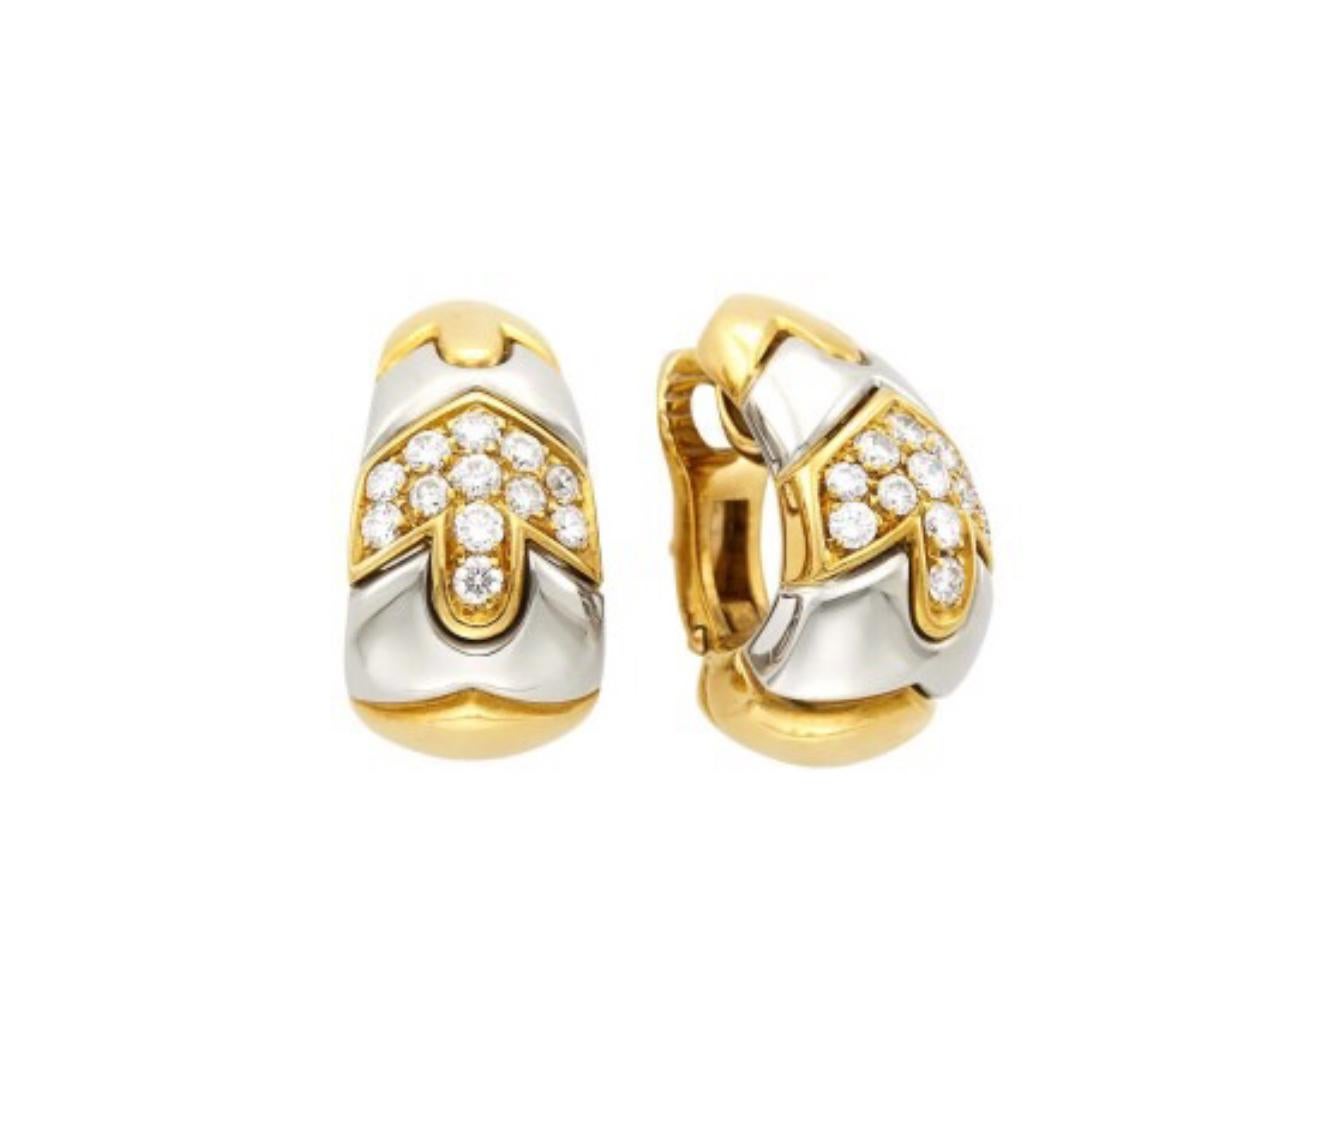 A chic pair of Bulgari two-color 18 karat gold earclips featuring 24 round diamonds totaling approximately 1.10 cts. Weight approximately 14.6 dwts. Made in Italy circa 1980. Measure 15/16 x 1/2 to 3/8 inch.